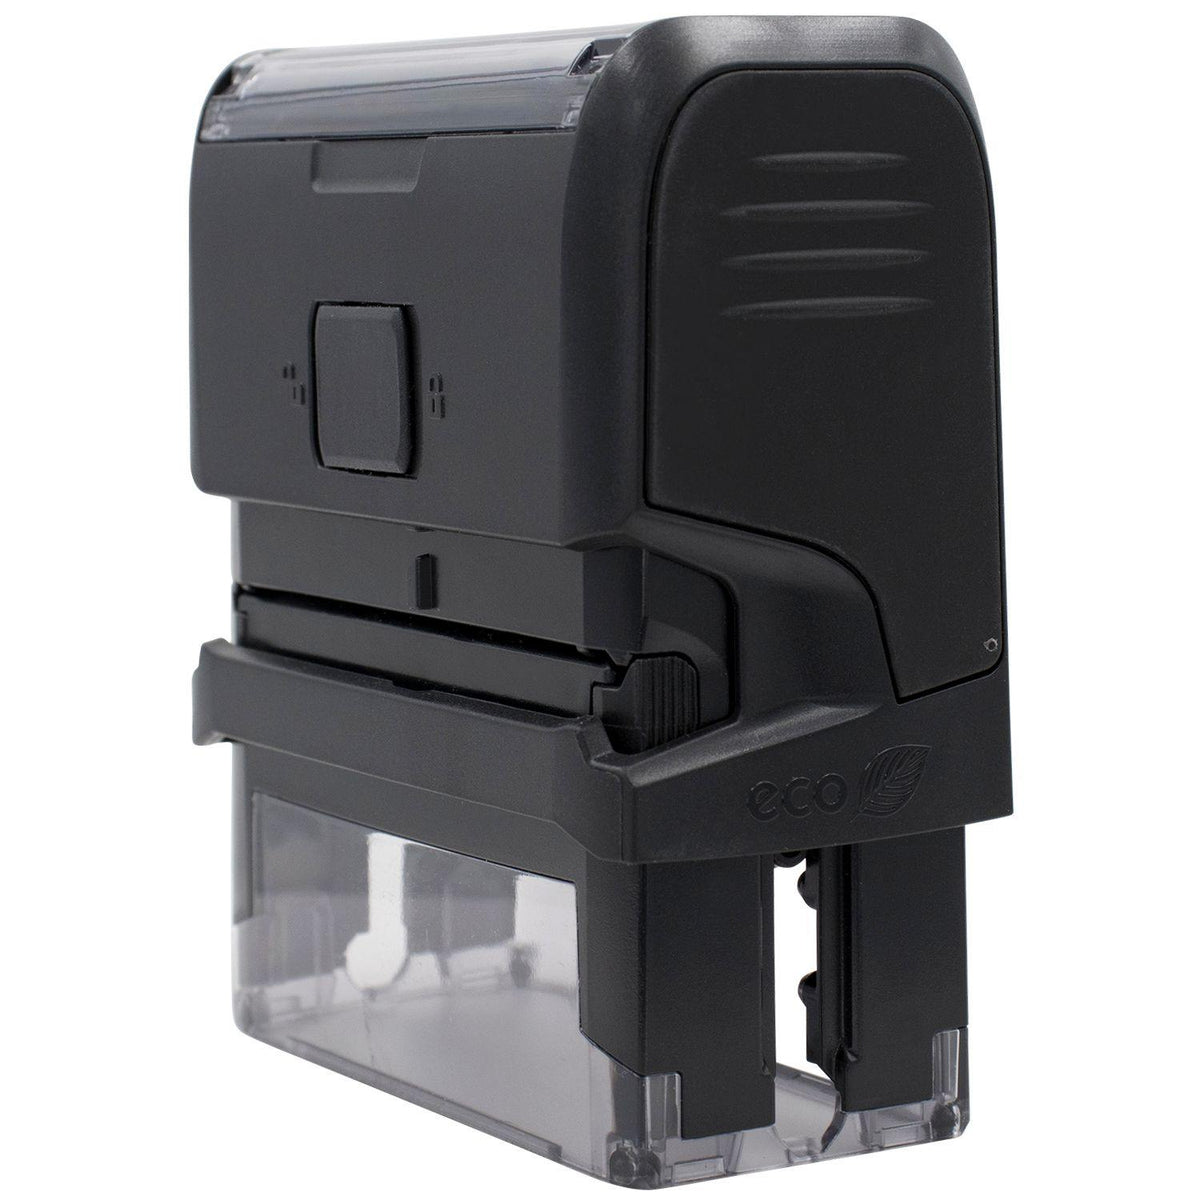 Self Inking Validate Only Stamp - Engineer Seal Stamps - Brand_Trodat, Impression Size_Small, Stamp Type_Self-Inking Stamp, Type of Use_Office